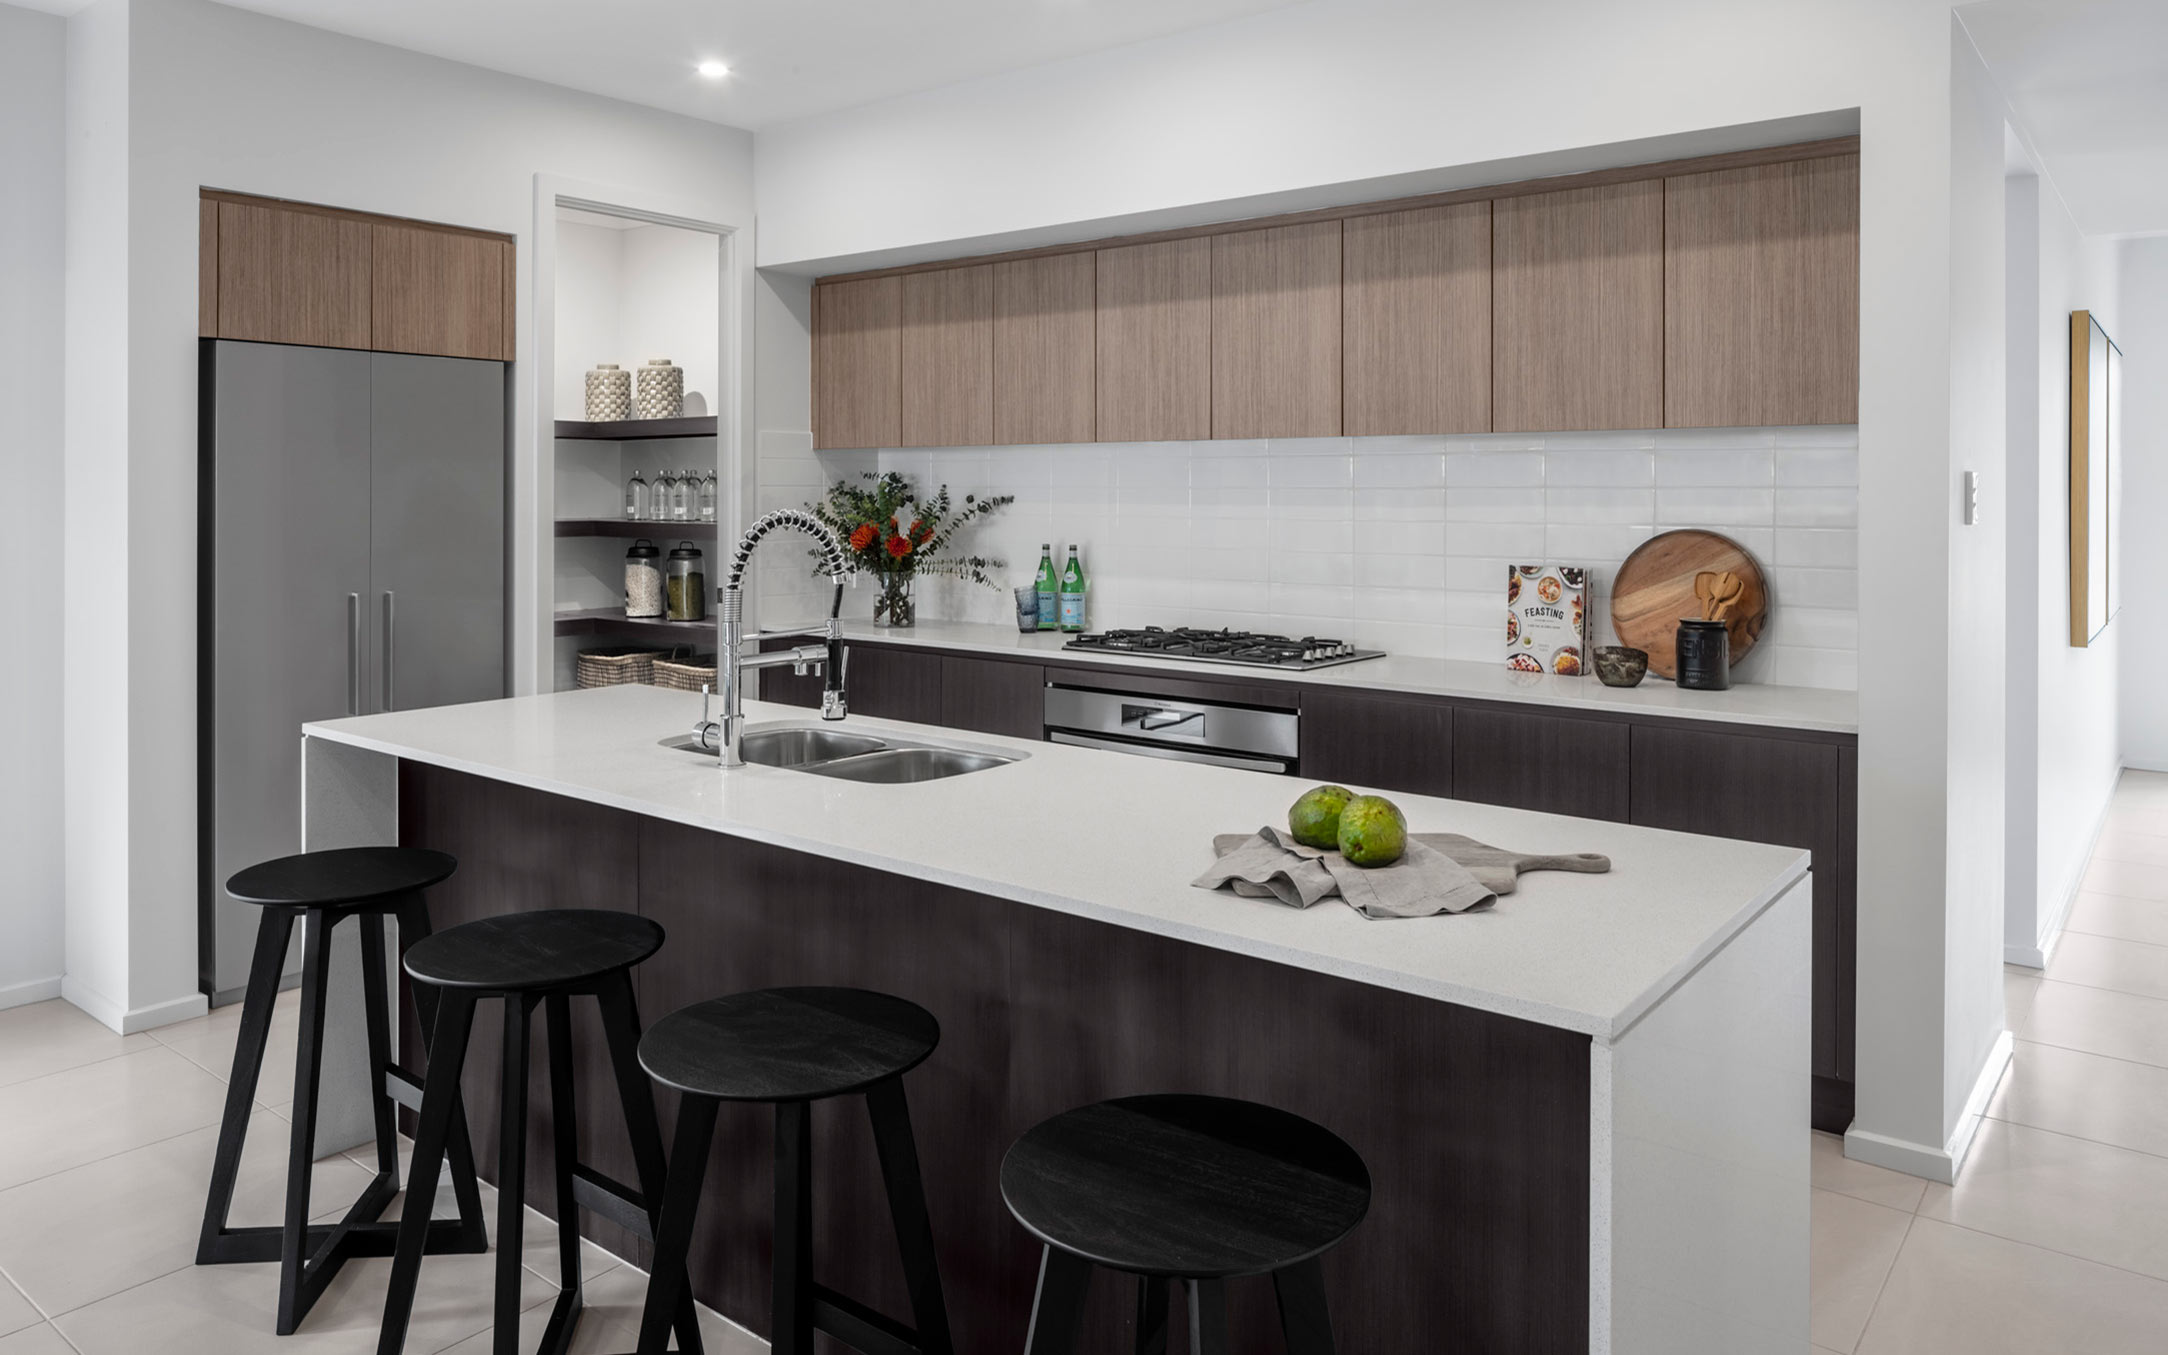 Thrive Homes Helix House Design Kitchen at Spring Farm